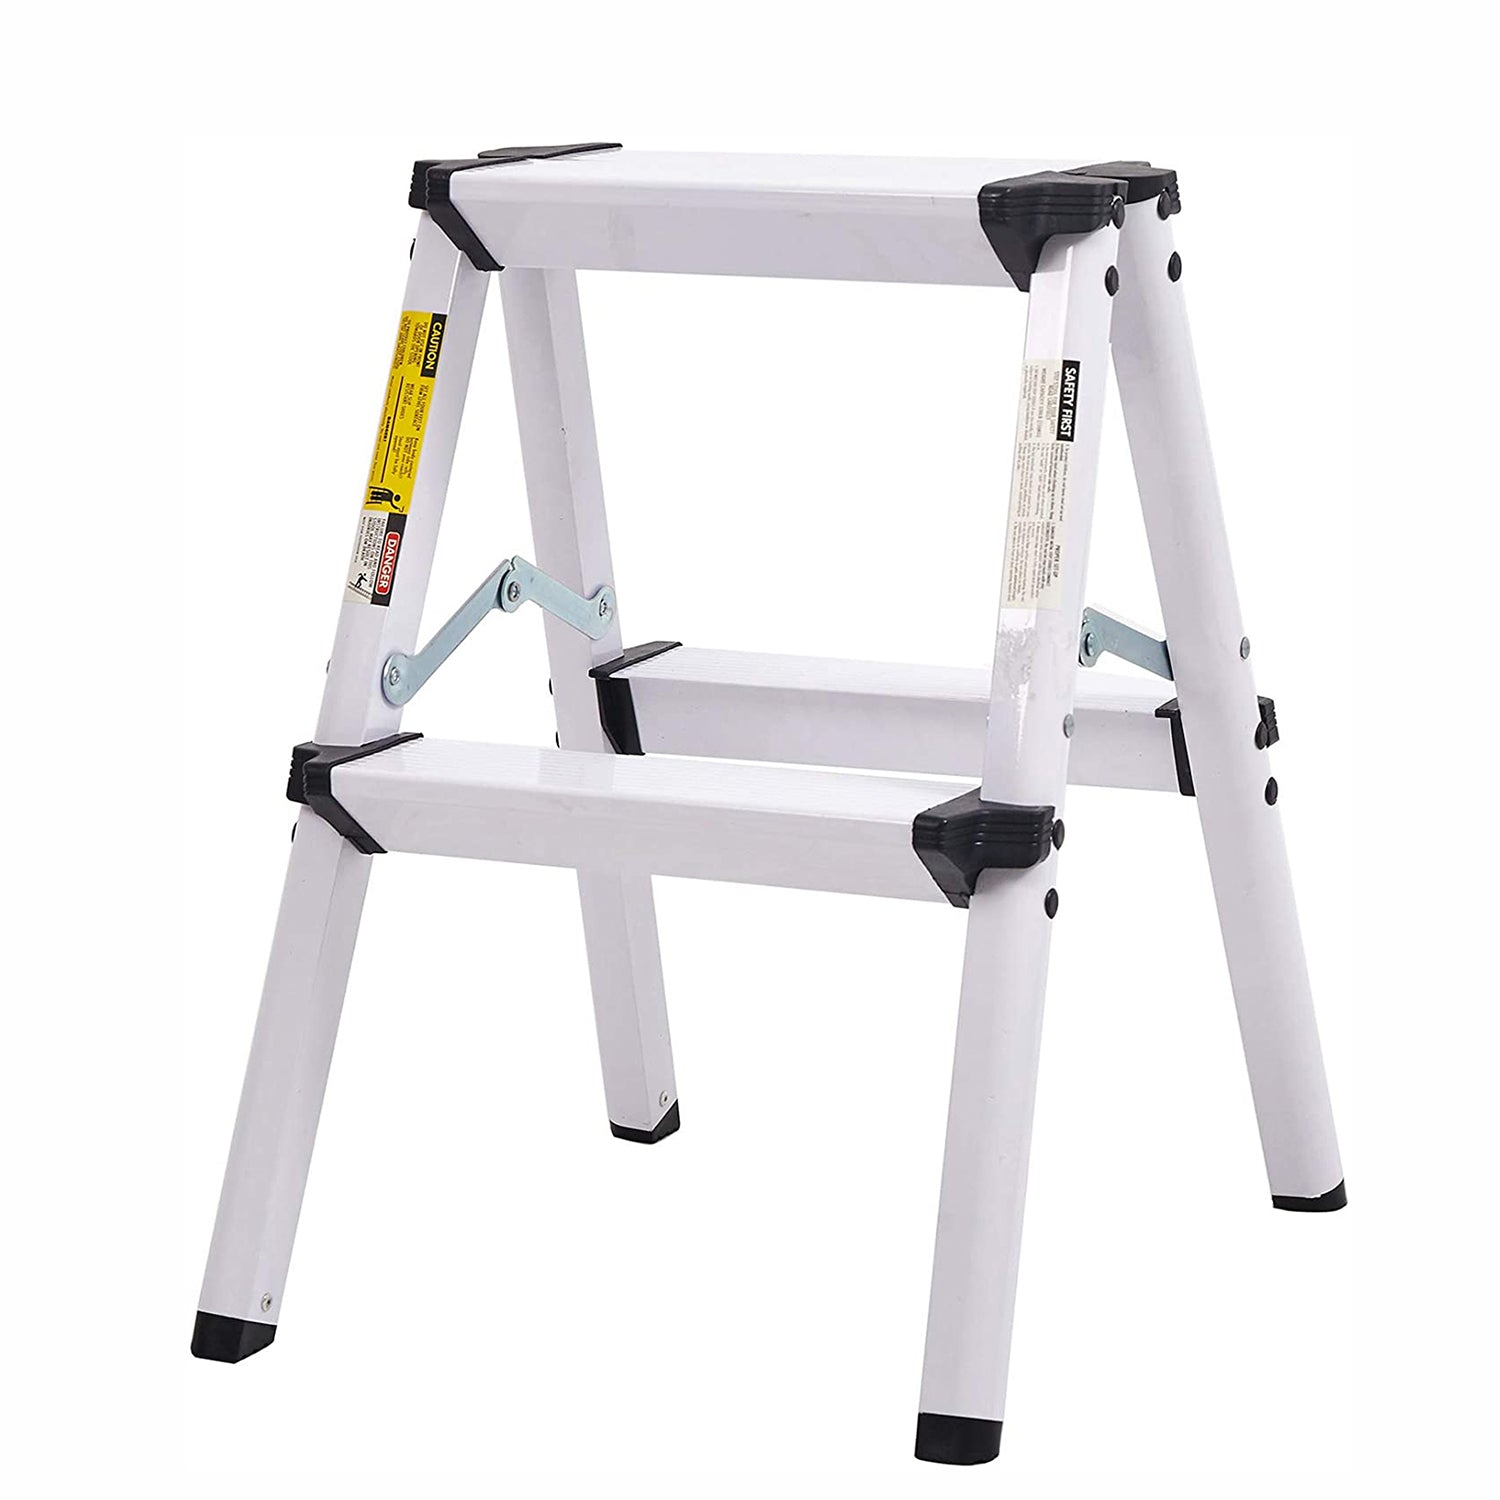 2 Step Ladder Folding White Aluminum Step Stool Capacity 250 lbs for Adults, 20"